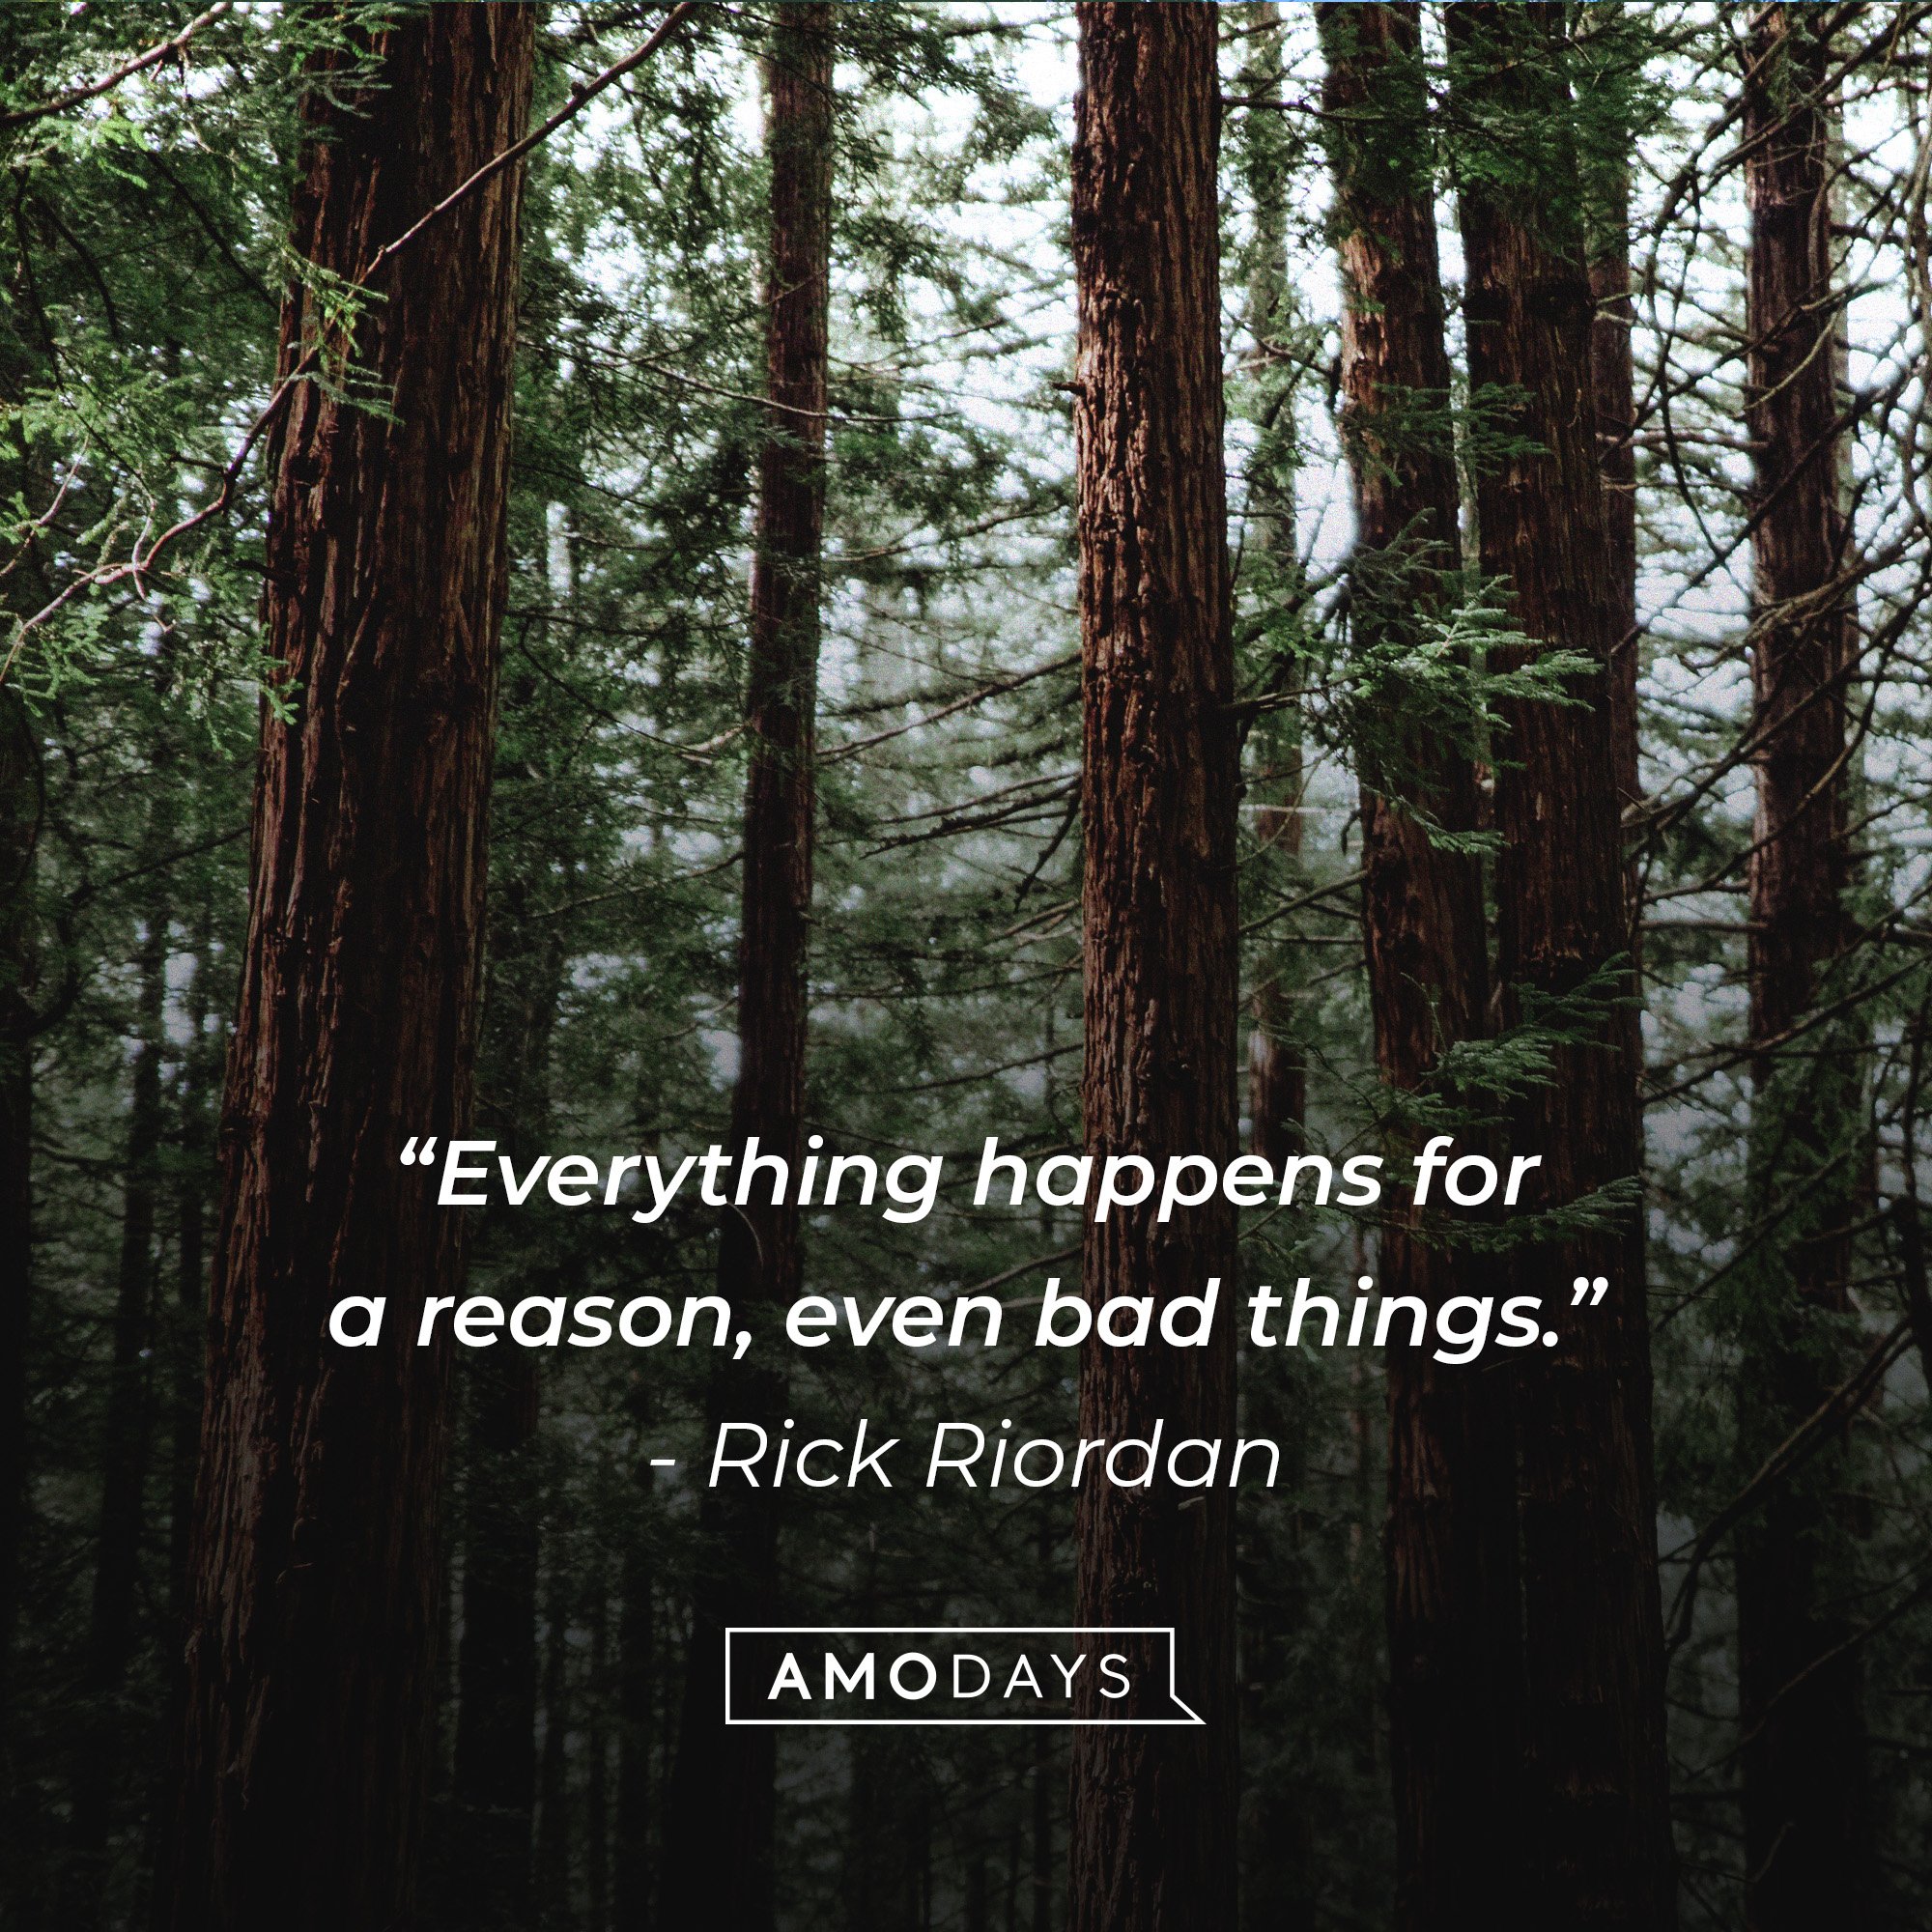  Rick Riordan's quote: “Everything happens for a reason, even bad things.”| Image: AmoDays